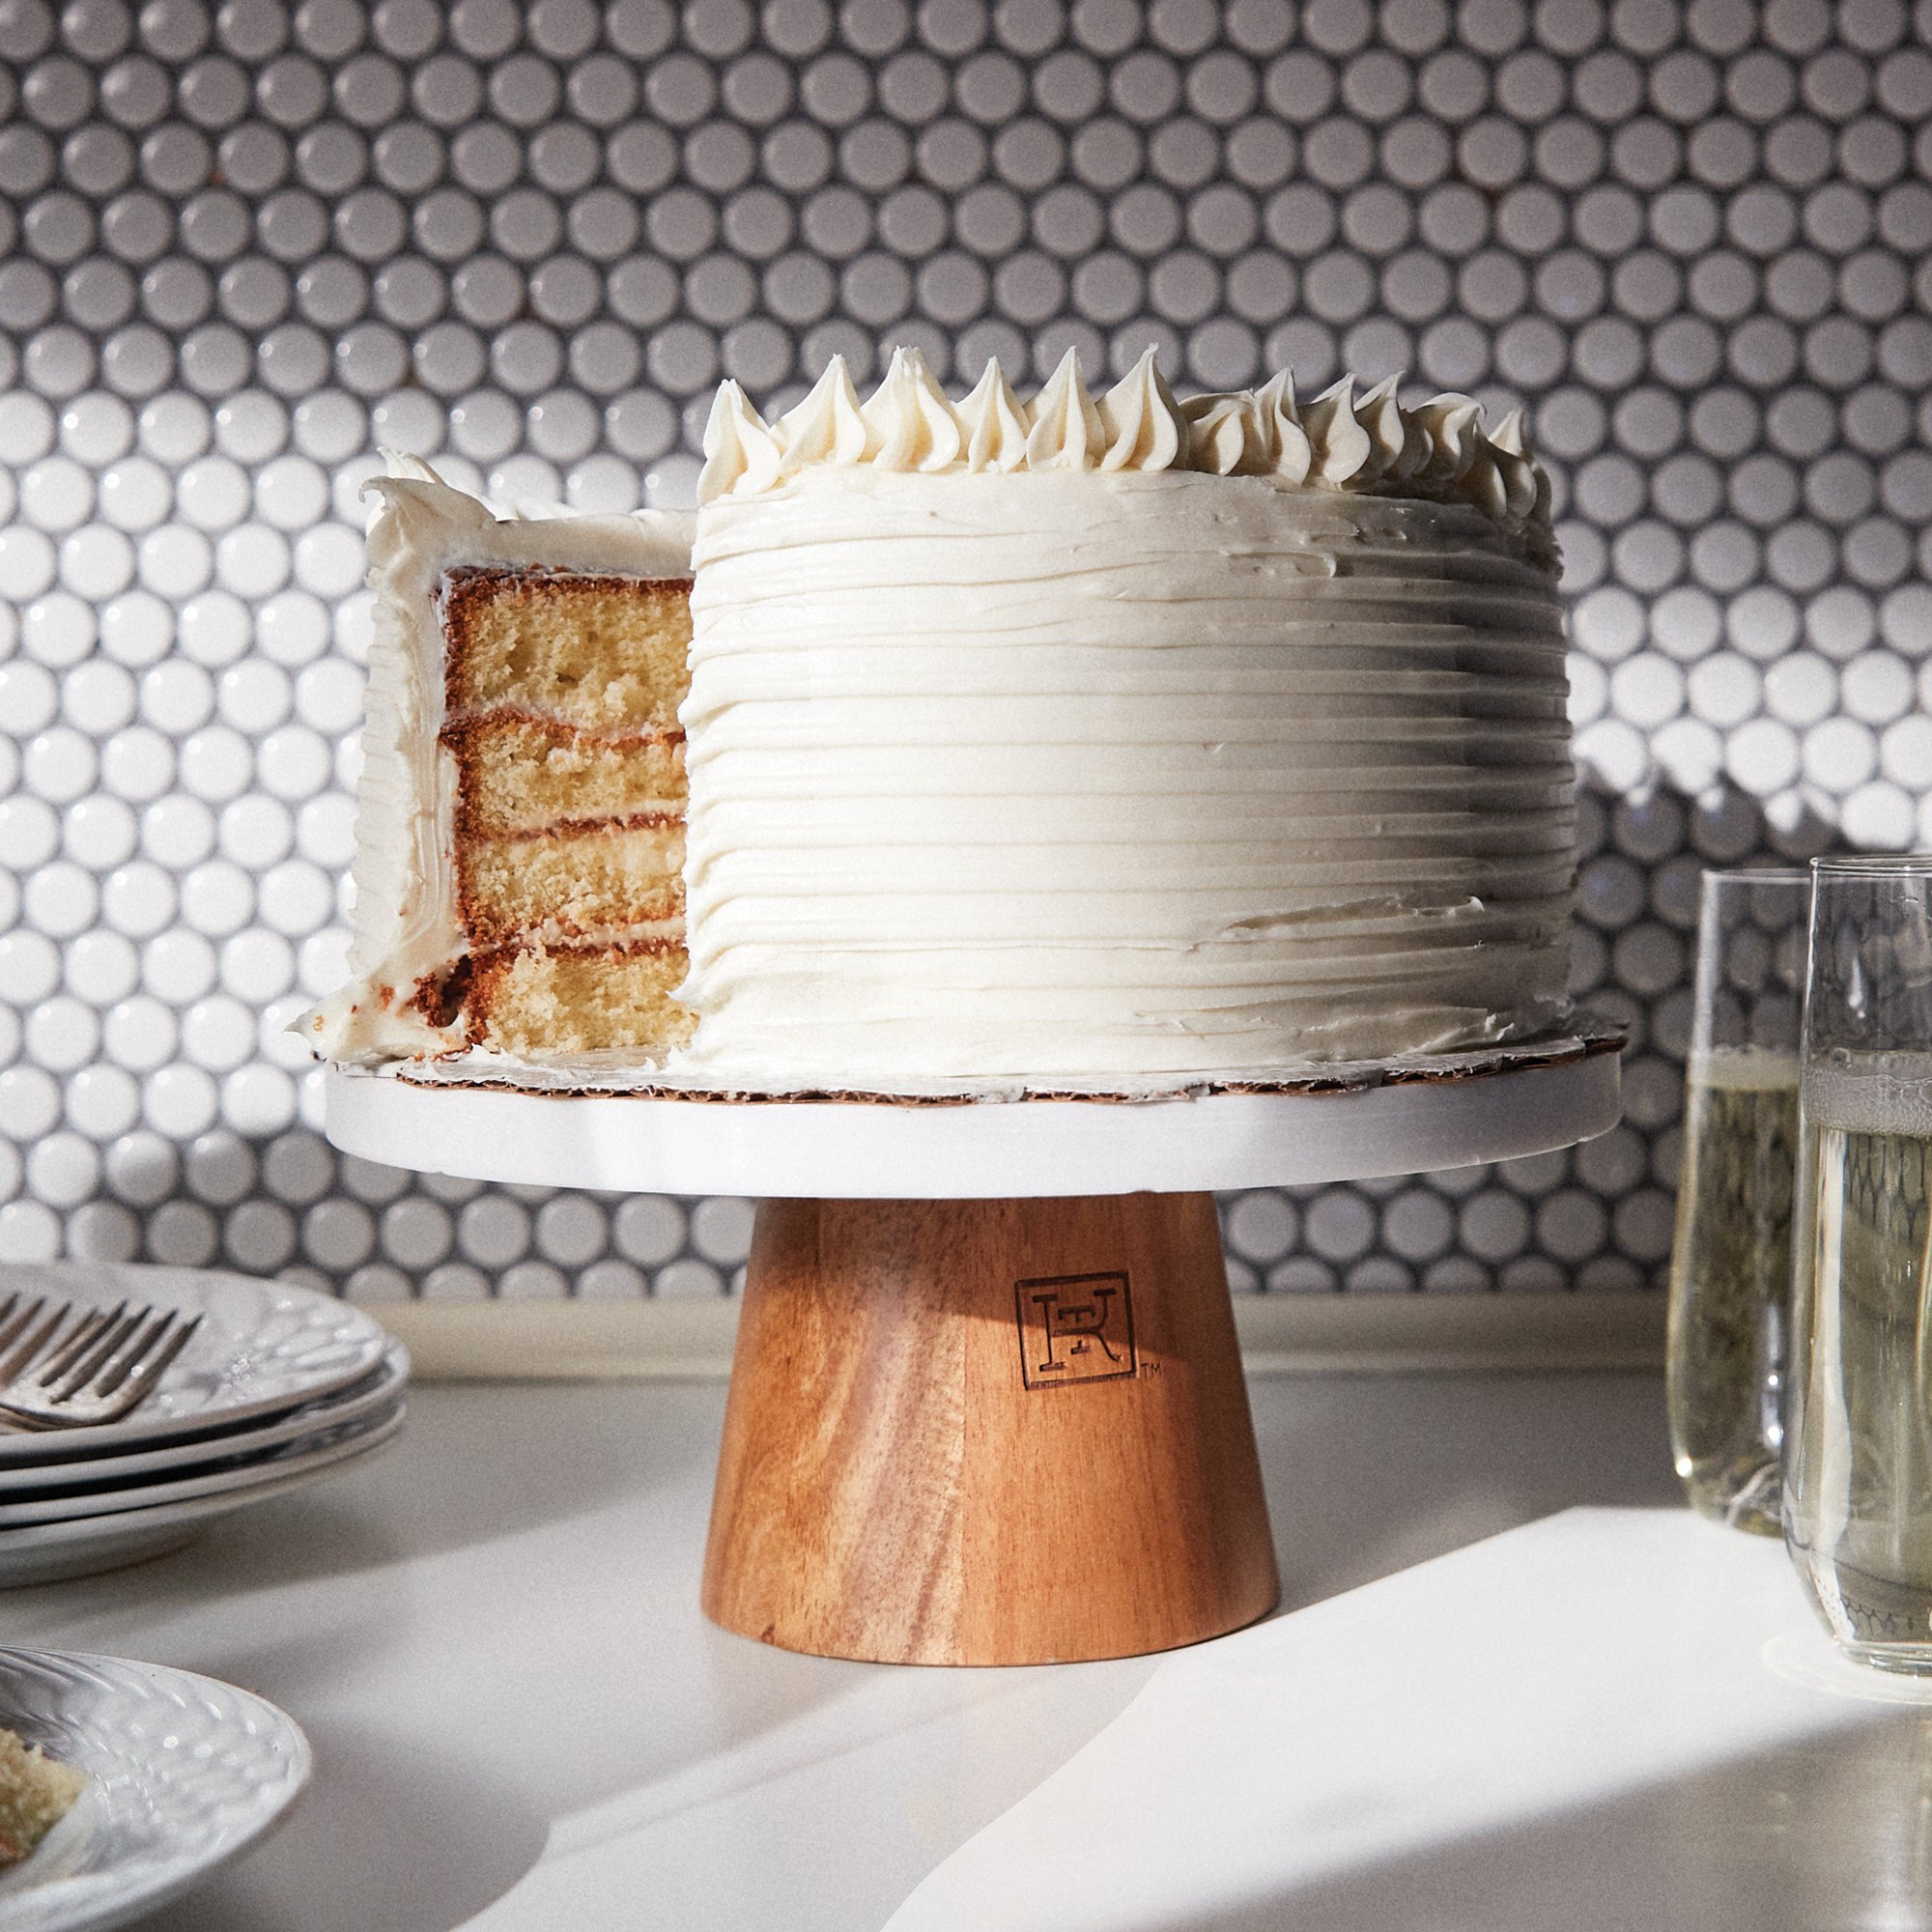 Genoise, génoise, genoese. And trifle | Bread, Cakes And Ale